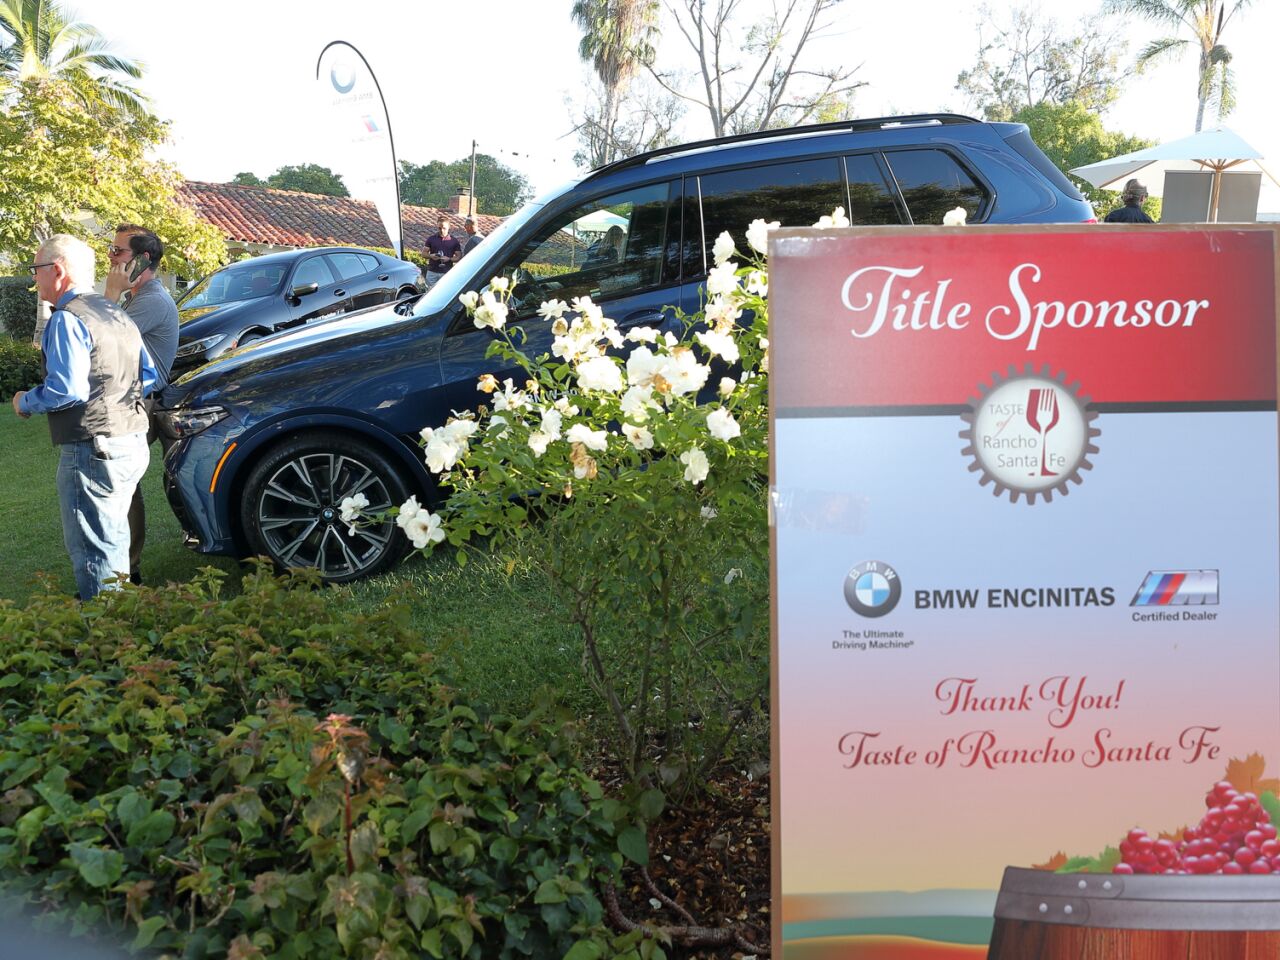 Vehicles on display from title sponsor BMW of Encinitas